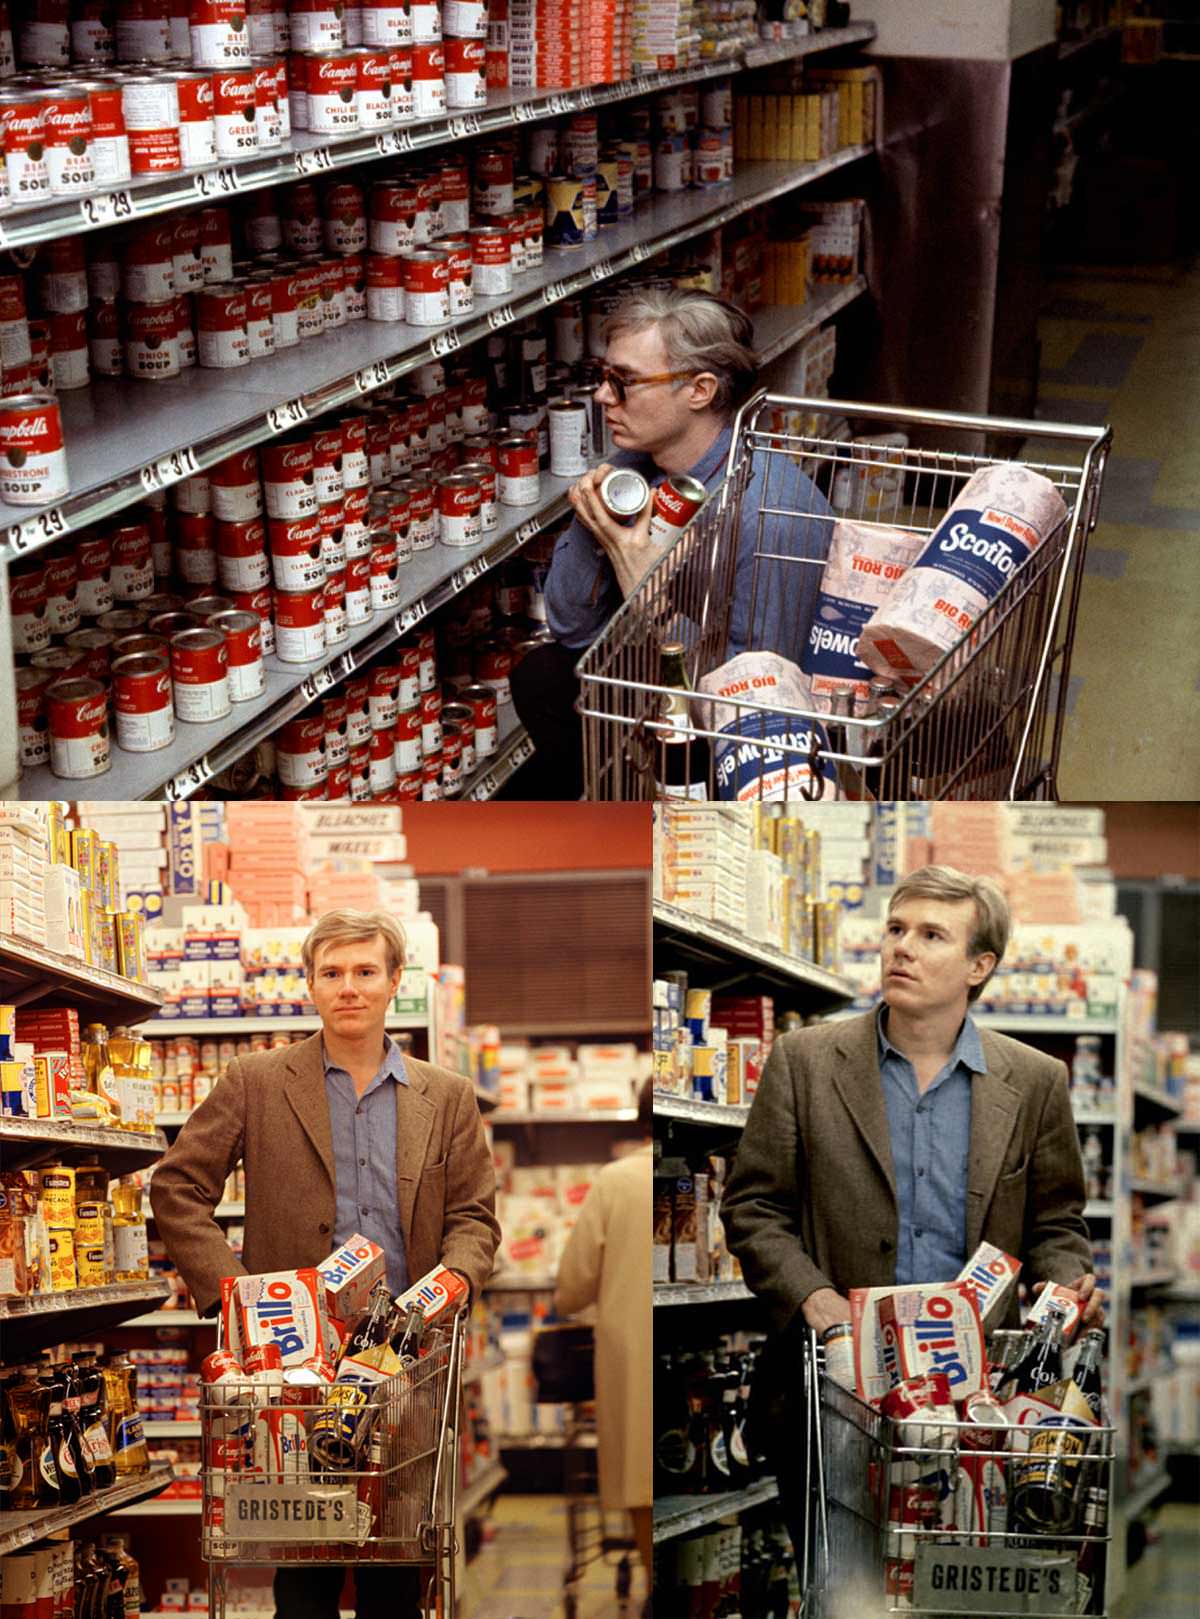 Andy Warhol doing what he loved- buying soup.